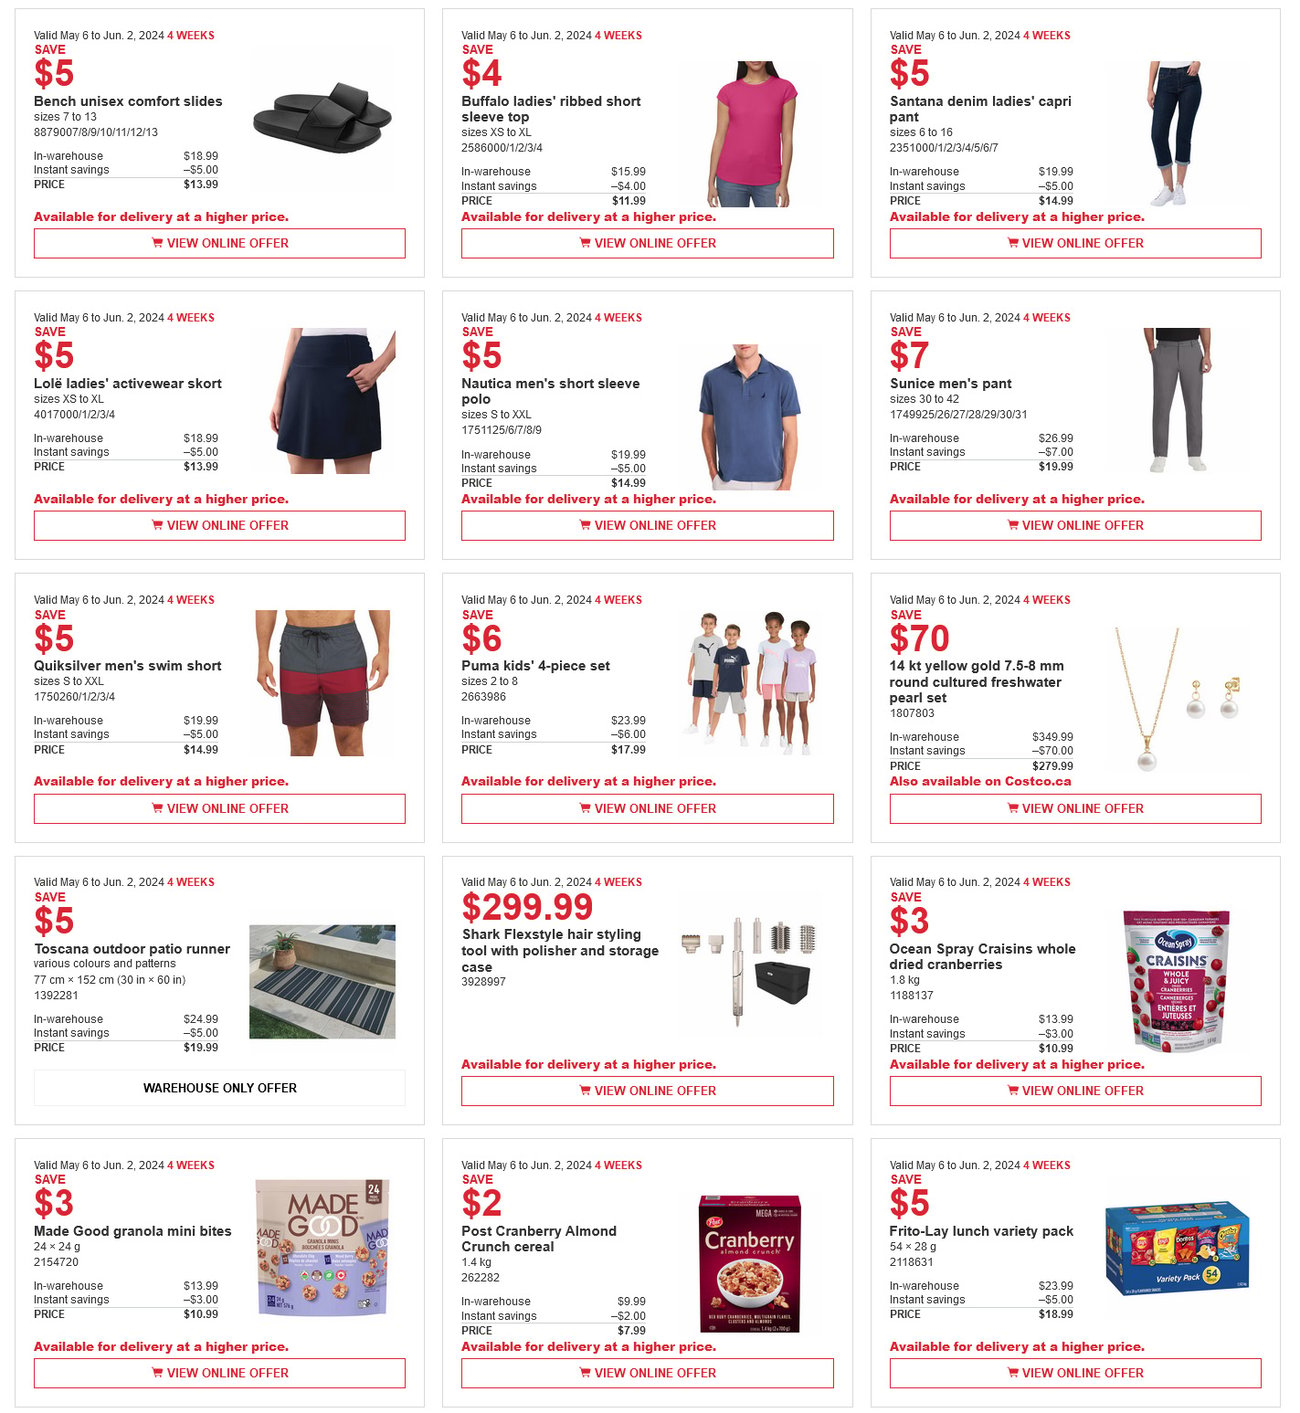 Costco Flyer - Savings & Coupons at your Local Warehouse and Online - Page 3